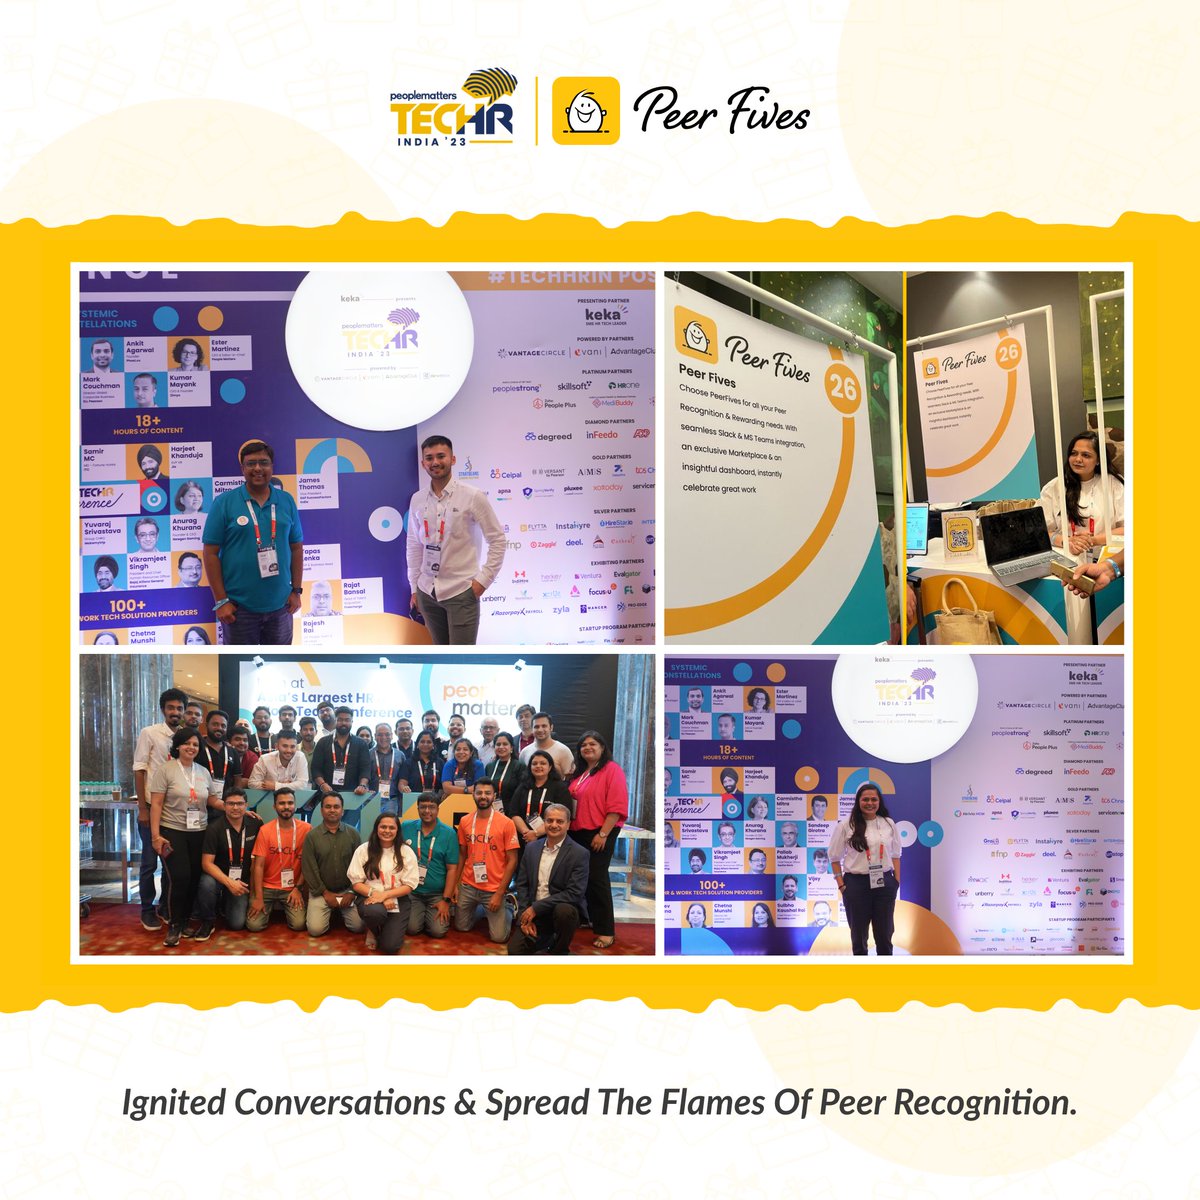 Our journey at the event was an incredible success, as we connected, engaged, and ignited the spark of appreciation in every interaction.

Get your free trial today: Peerfives.com

#TechHRin #TechHR2023 #peoplematters #HRtech #FutureOfTech #FutureofWork #HR #Peerfives